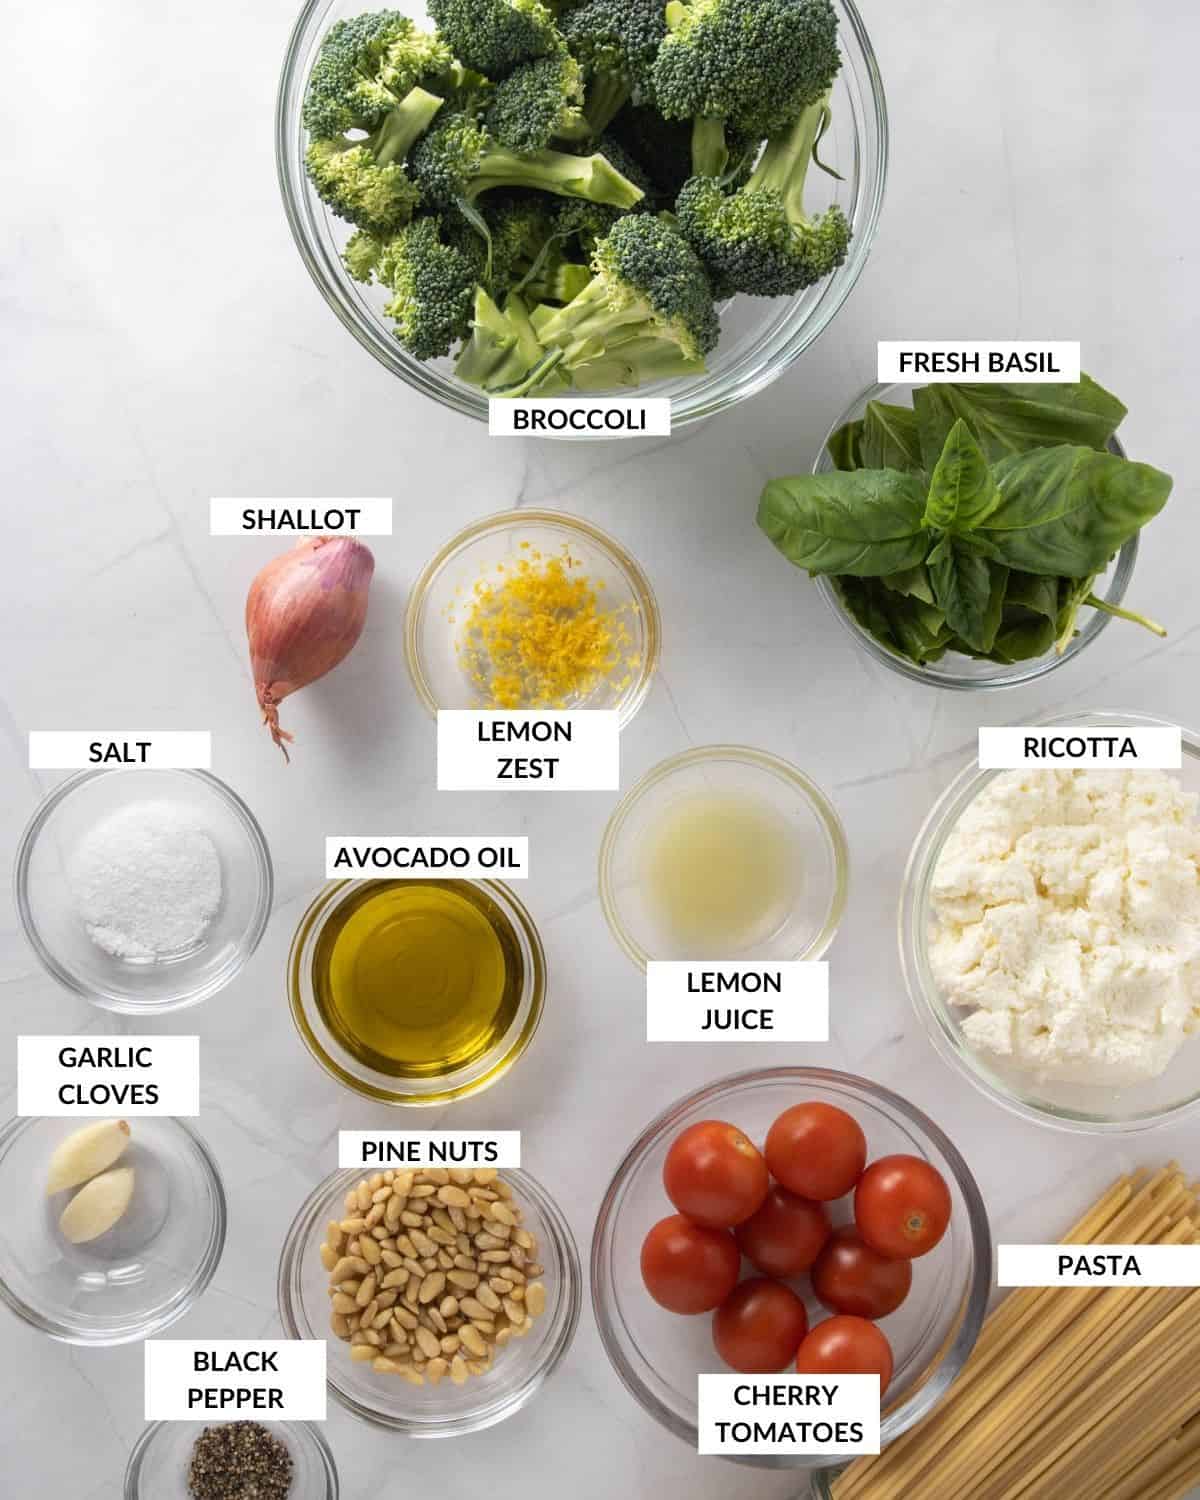 Labeled ingredient list - check recipe card for details!